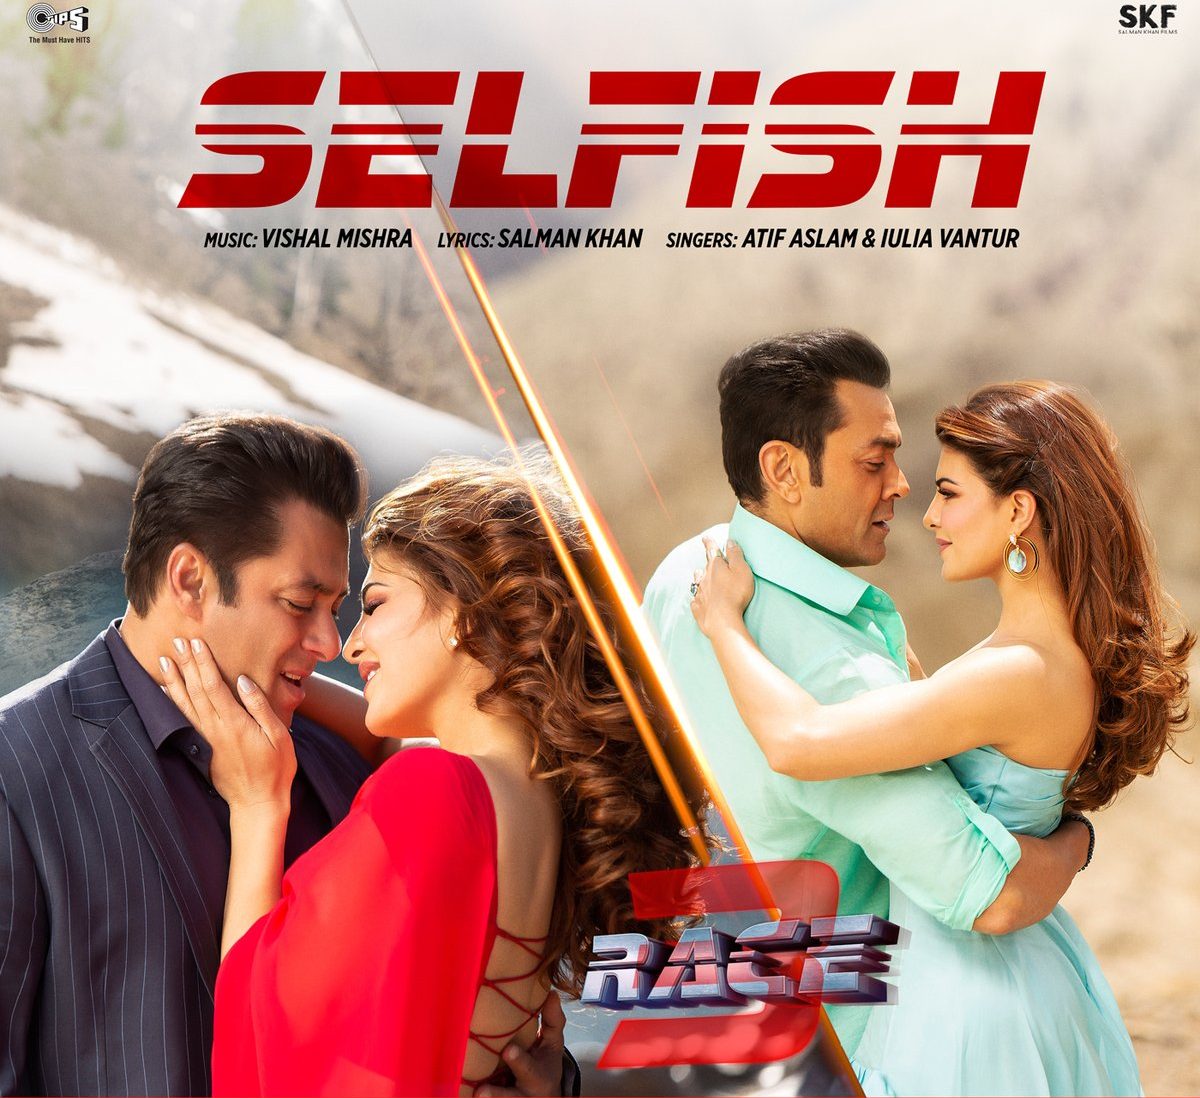 Watch Selfish Song from Race 3: Jacqueline Fernandez roromancing with Salman Khan and Bobby Deol